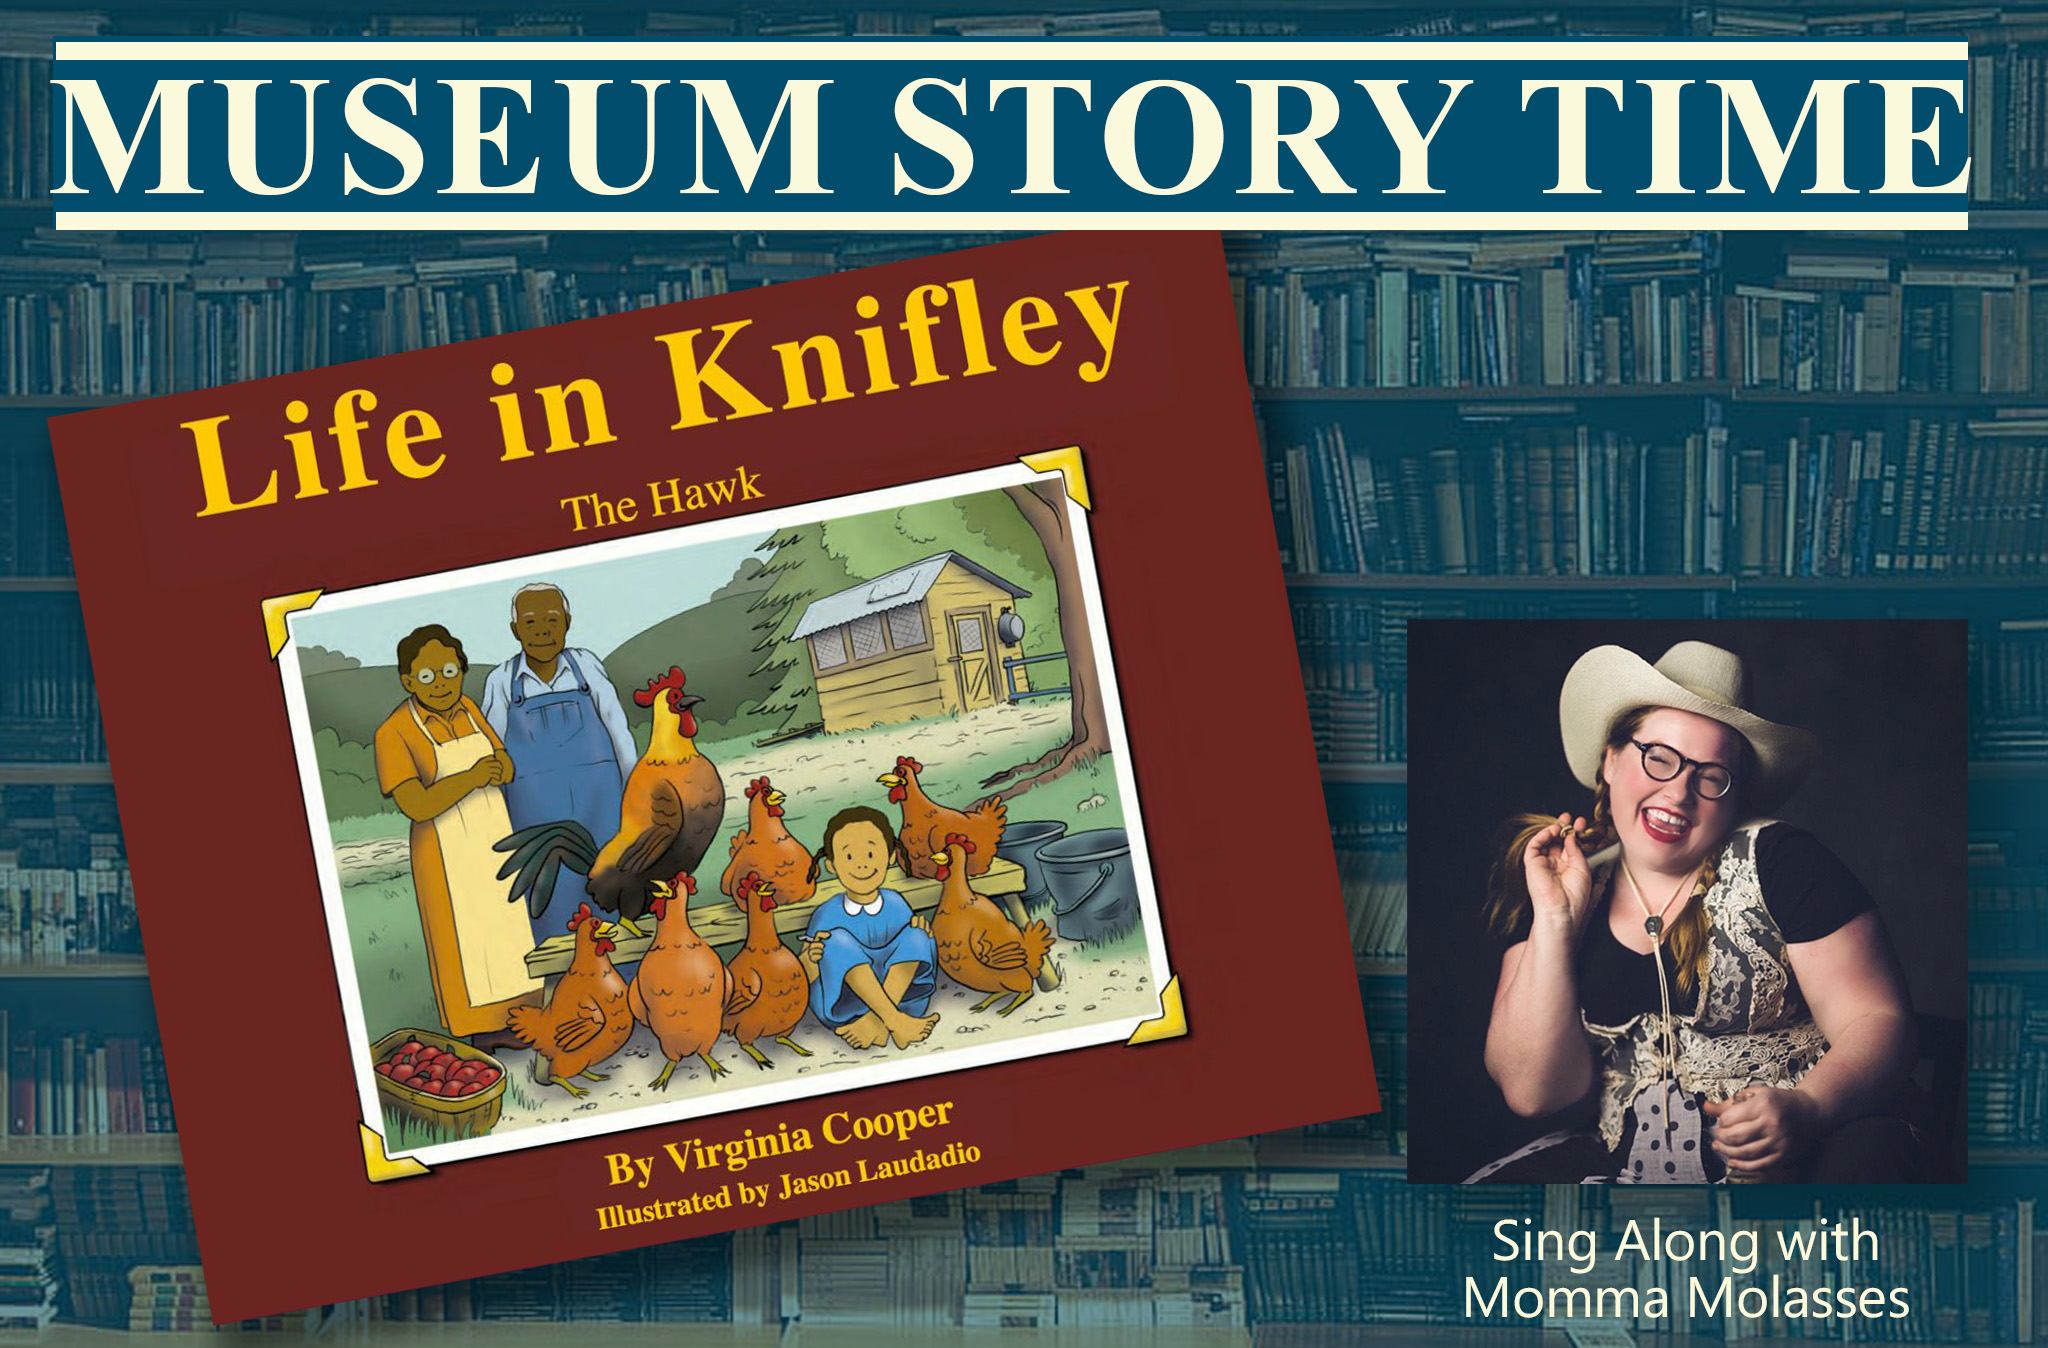 Museum Story Time graphic depicting the cover of the book Life in Knifley. The cover depicts an illustration of an elderly black couple and a young black girl in a field surrounded by hills and trees - and roosters! There is also an inset photo of musician Momma Molasses wearing a cowboy hat.